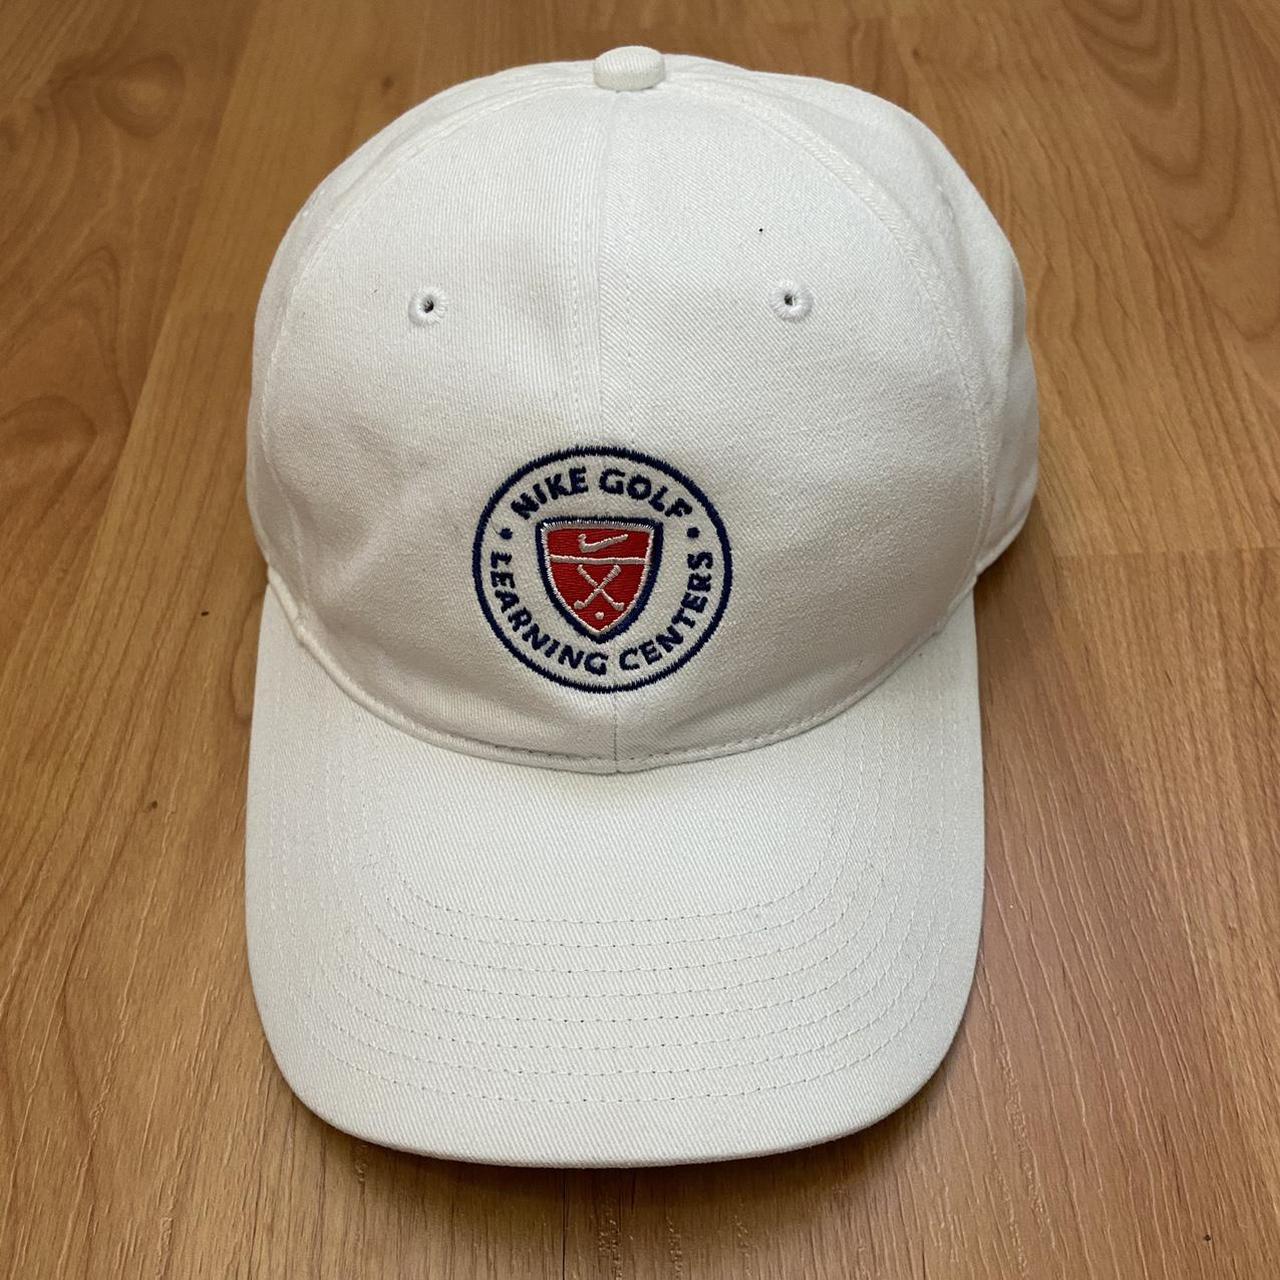 Nike Men's White and Navy Hat